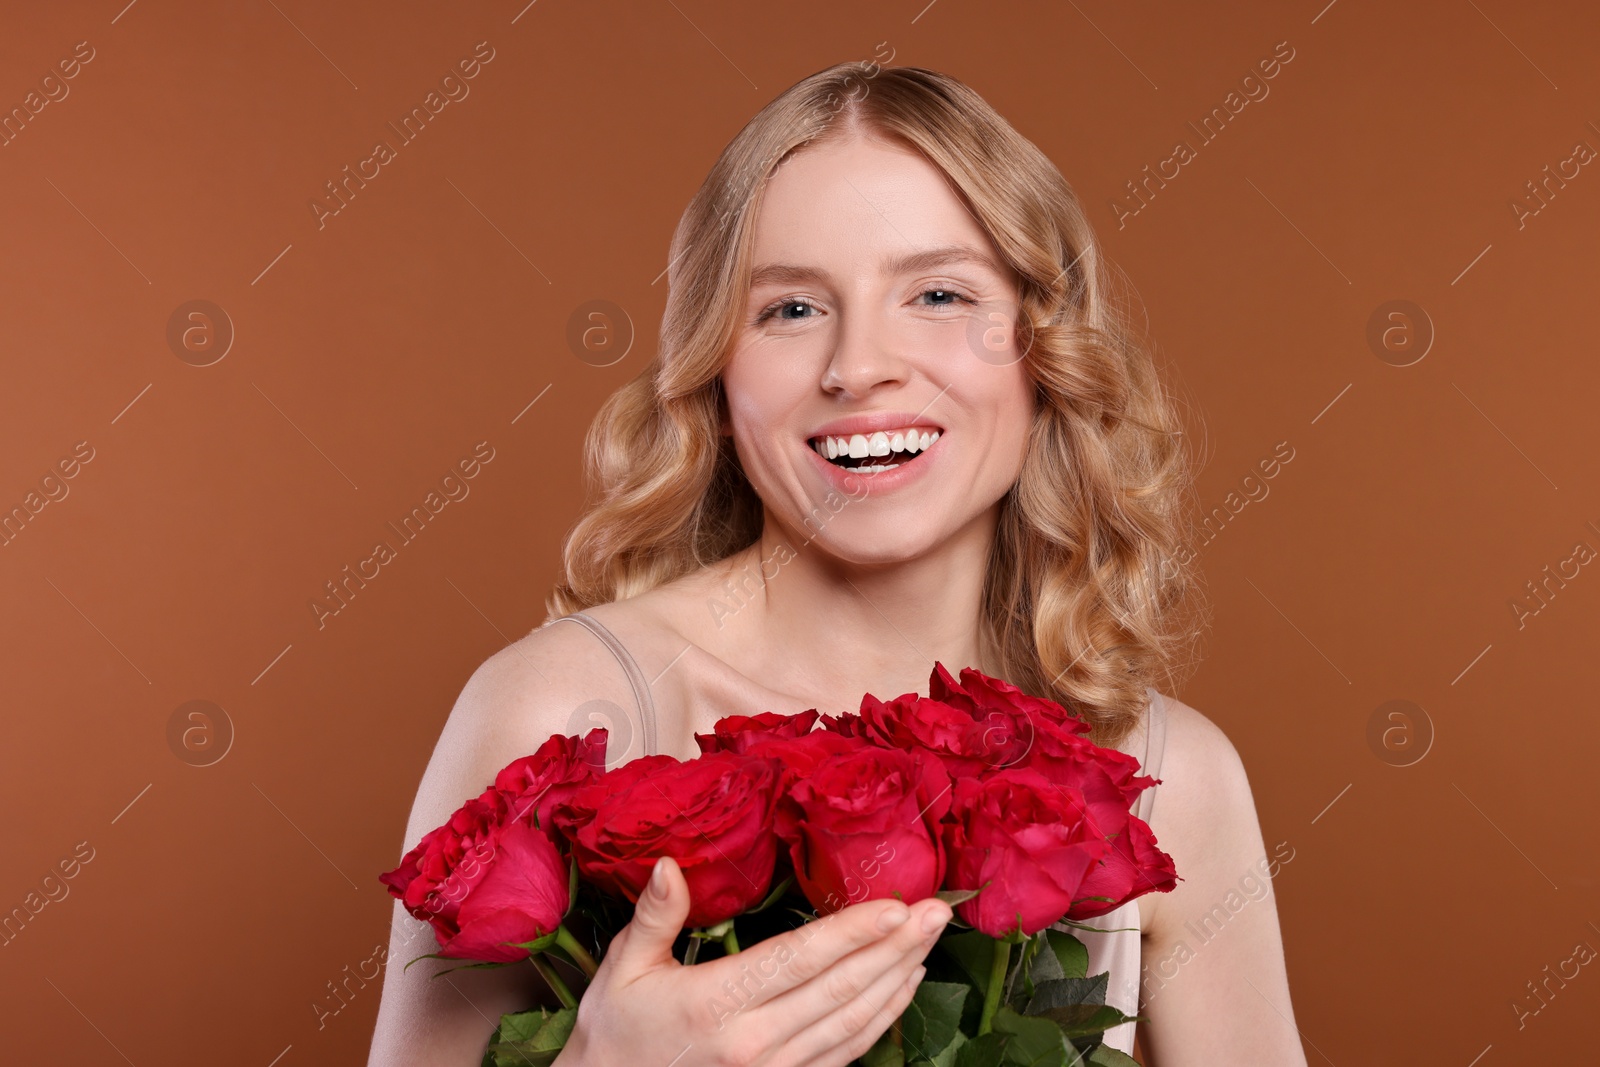 Photo of Beautiful woman with blonde hair holding bouquet of red roses on brown background